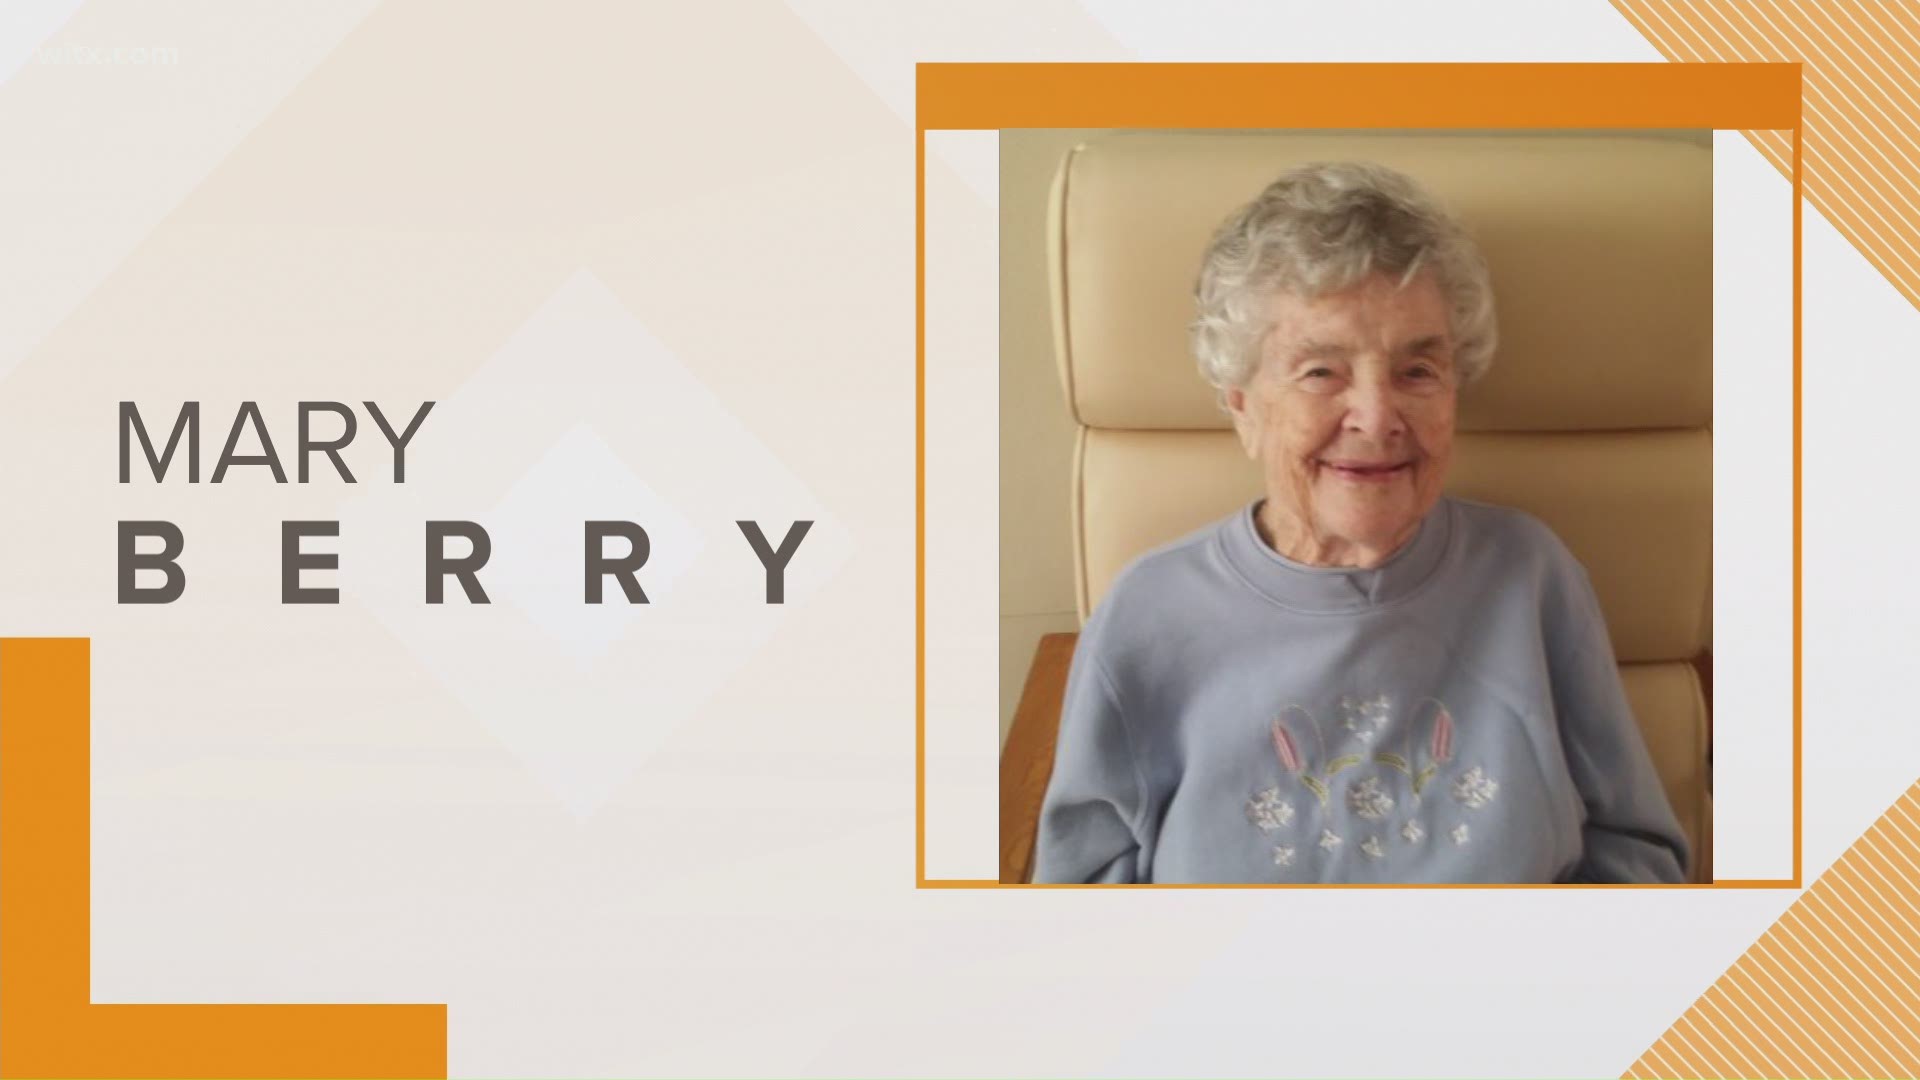 A Saluda woman recently celebrated her 103rd birthday, and her niece tells News 19 she is still going strong!